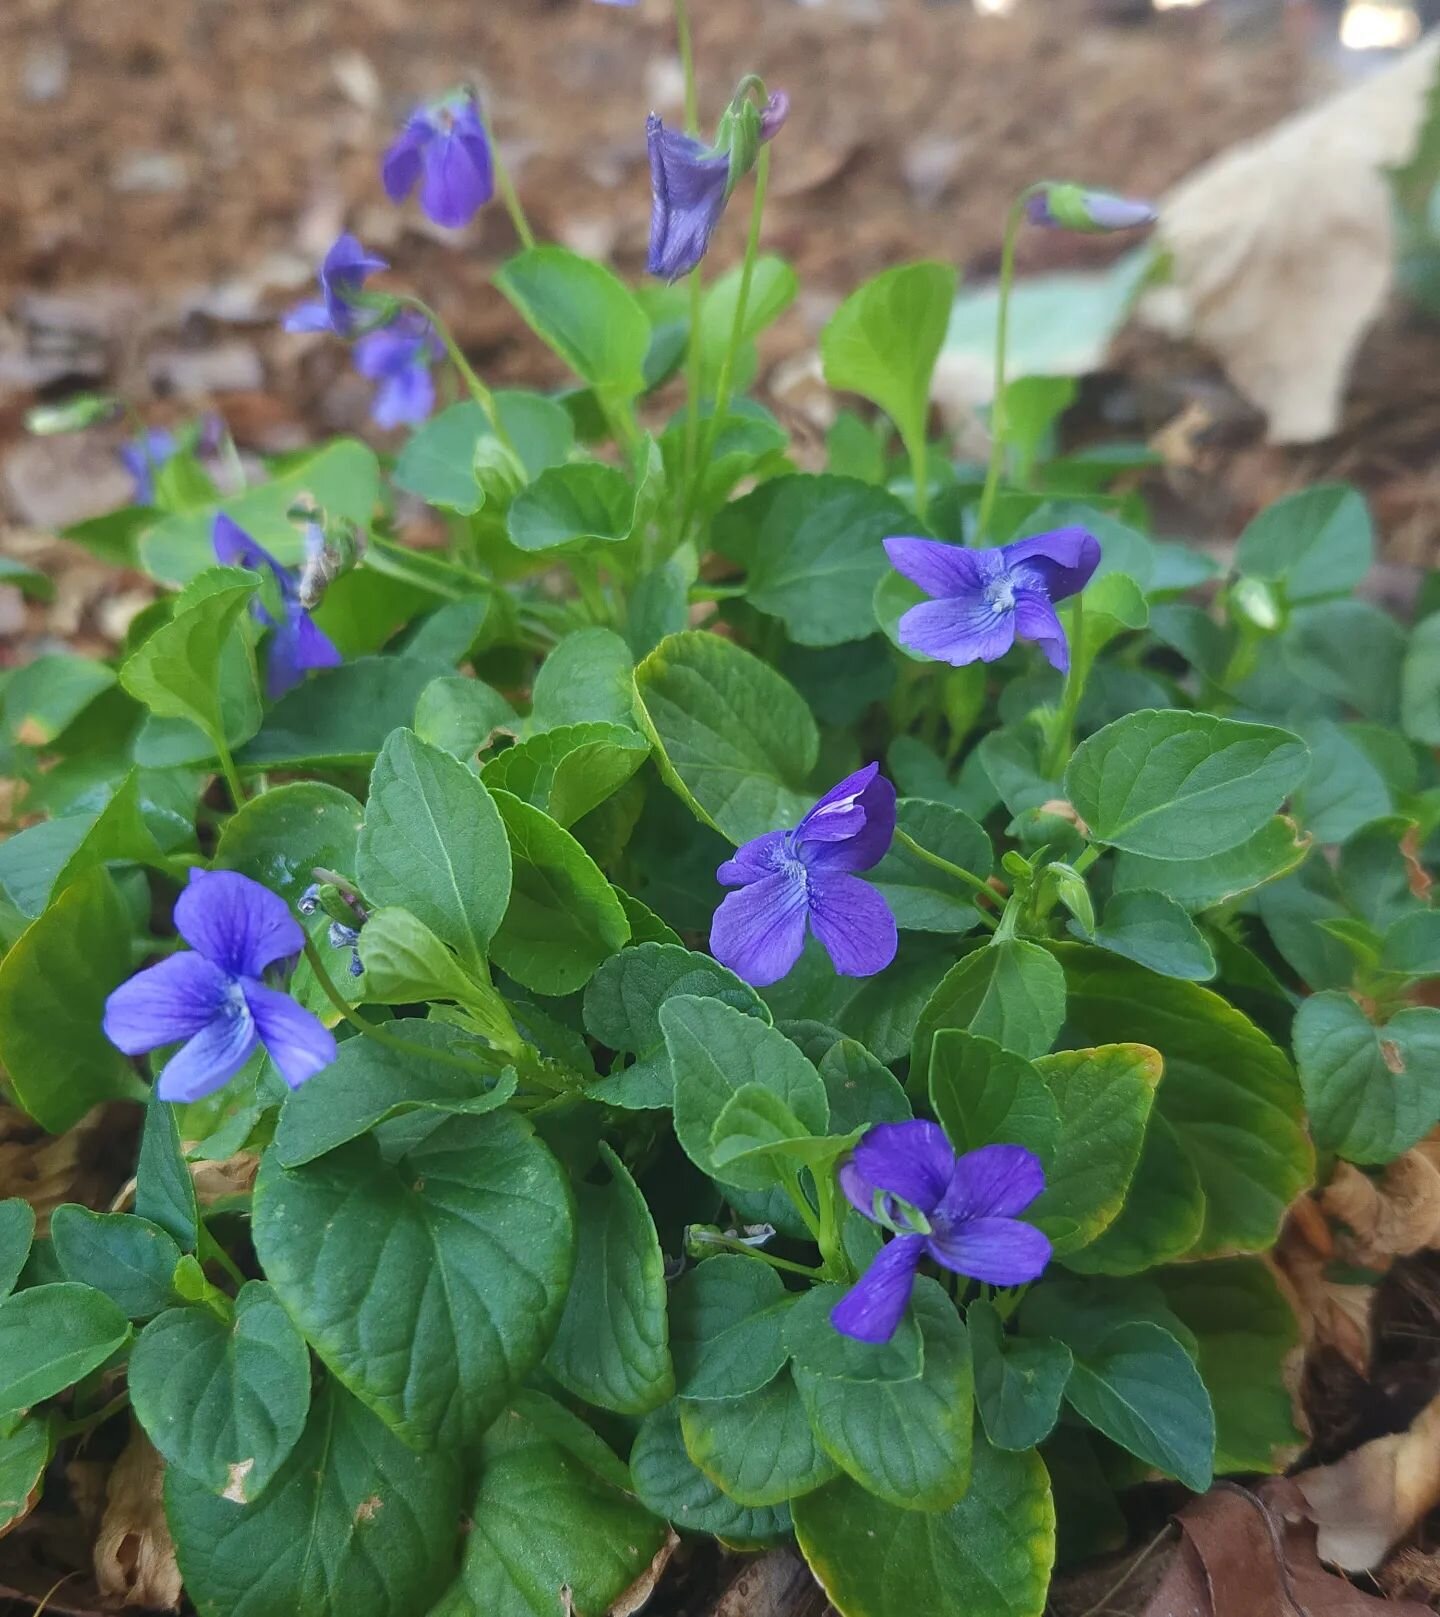 Dog Violets (Viola adunca) have started to bloom again! 
This shade loving CA native is local to those on the northern coast and sierras. It's summer deciduous, it's revival signals an end to the hottest days of the year.